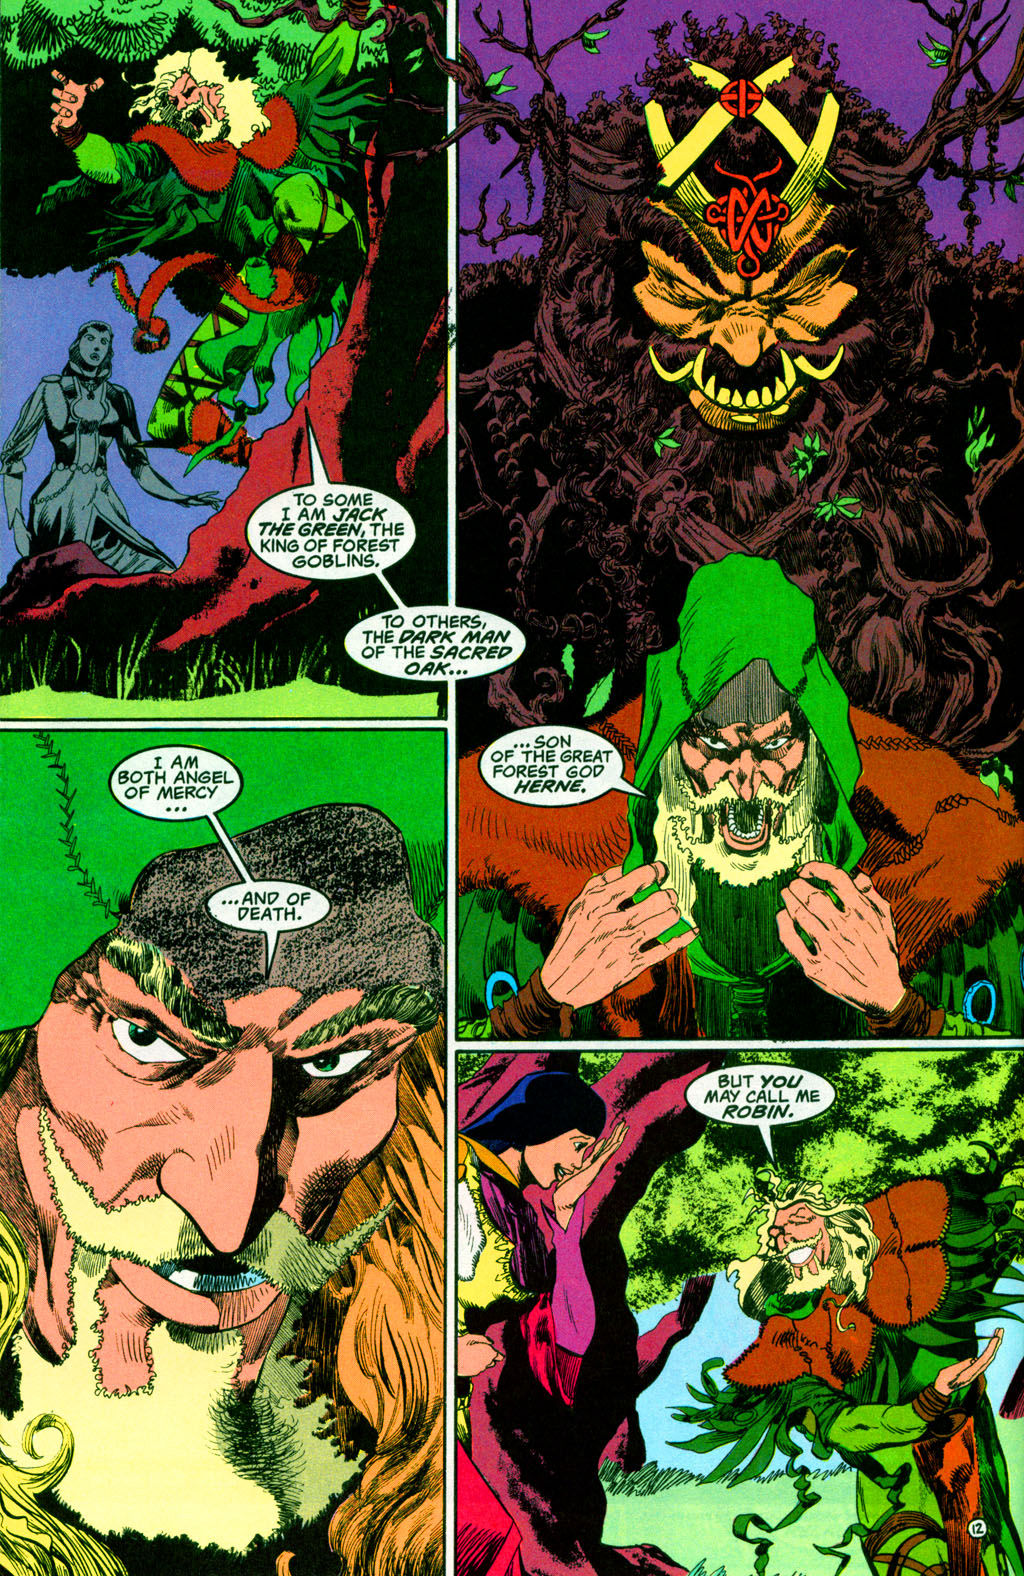 Robin Hood introduces himself, as Herne's Son, among other things. Written by Mike Grell and Mark Ryan